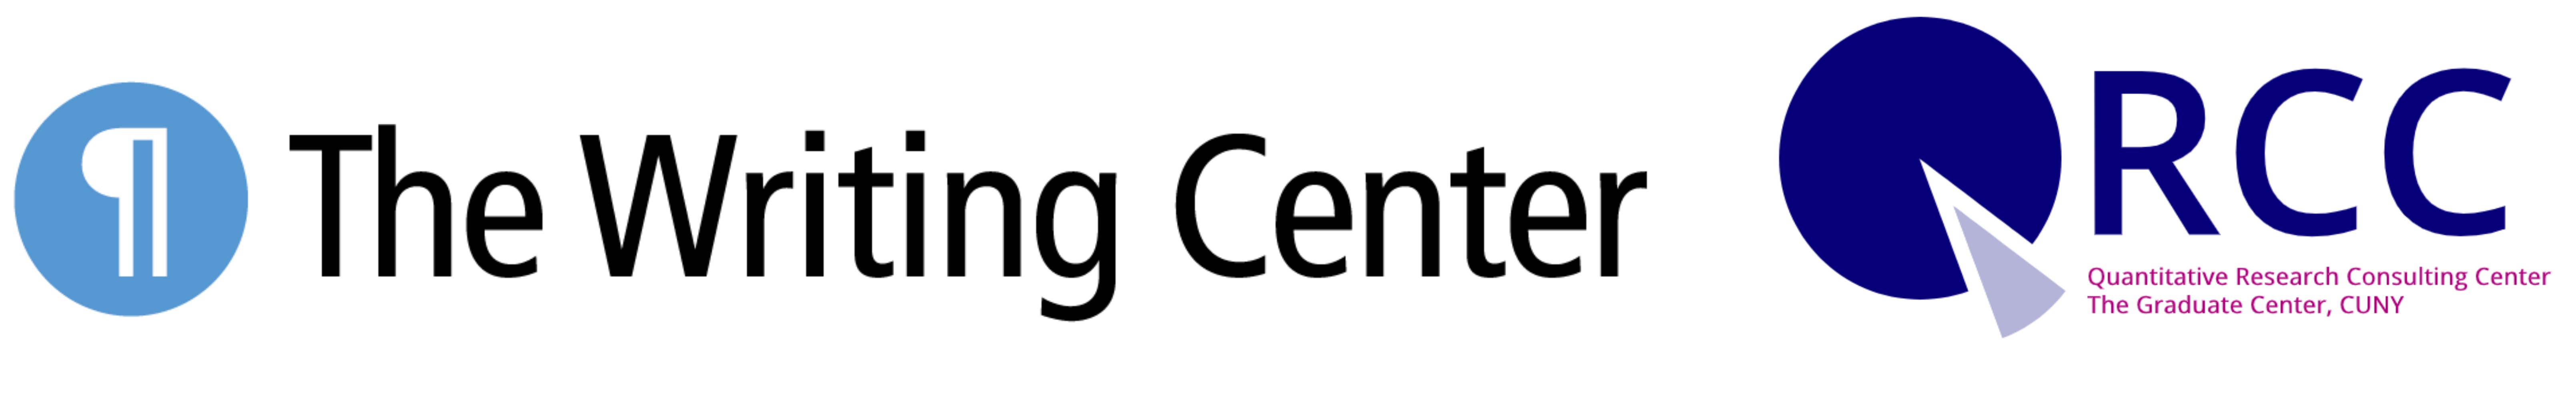 The Writing Center and the QRCC Logo